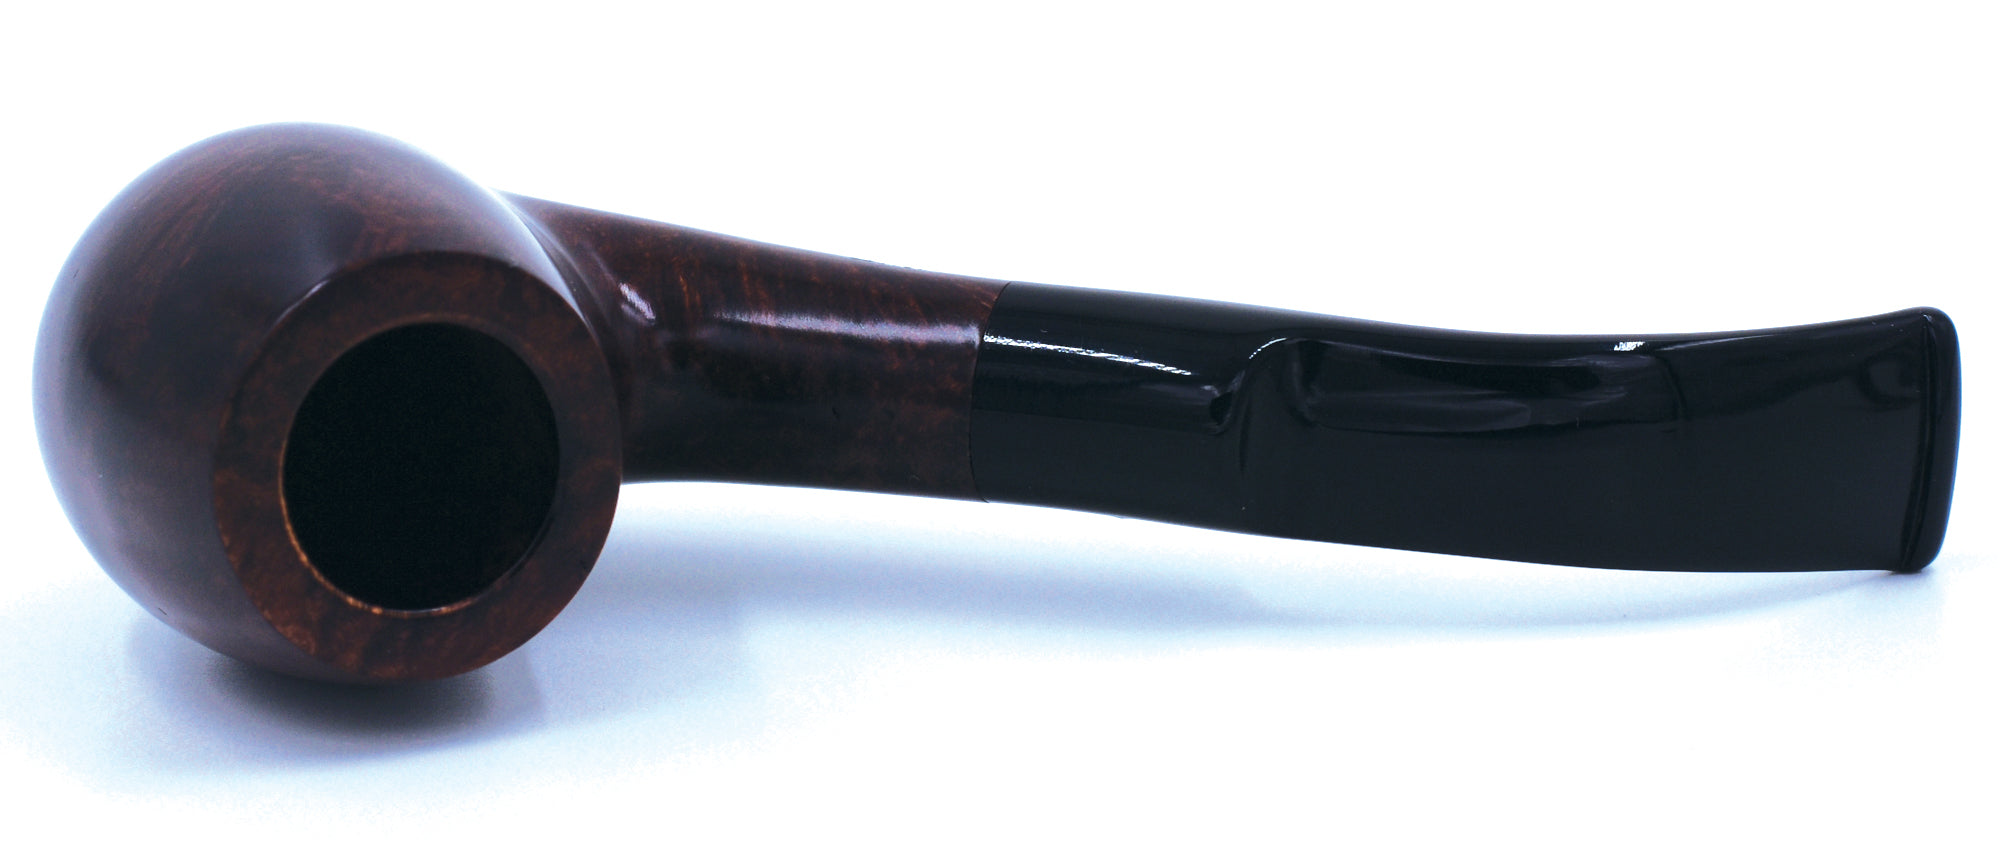 LEGENDEX® PAGANINI* 9 MM Filtered Briar Smoking Pipe Made In Italy 01-08-303